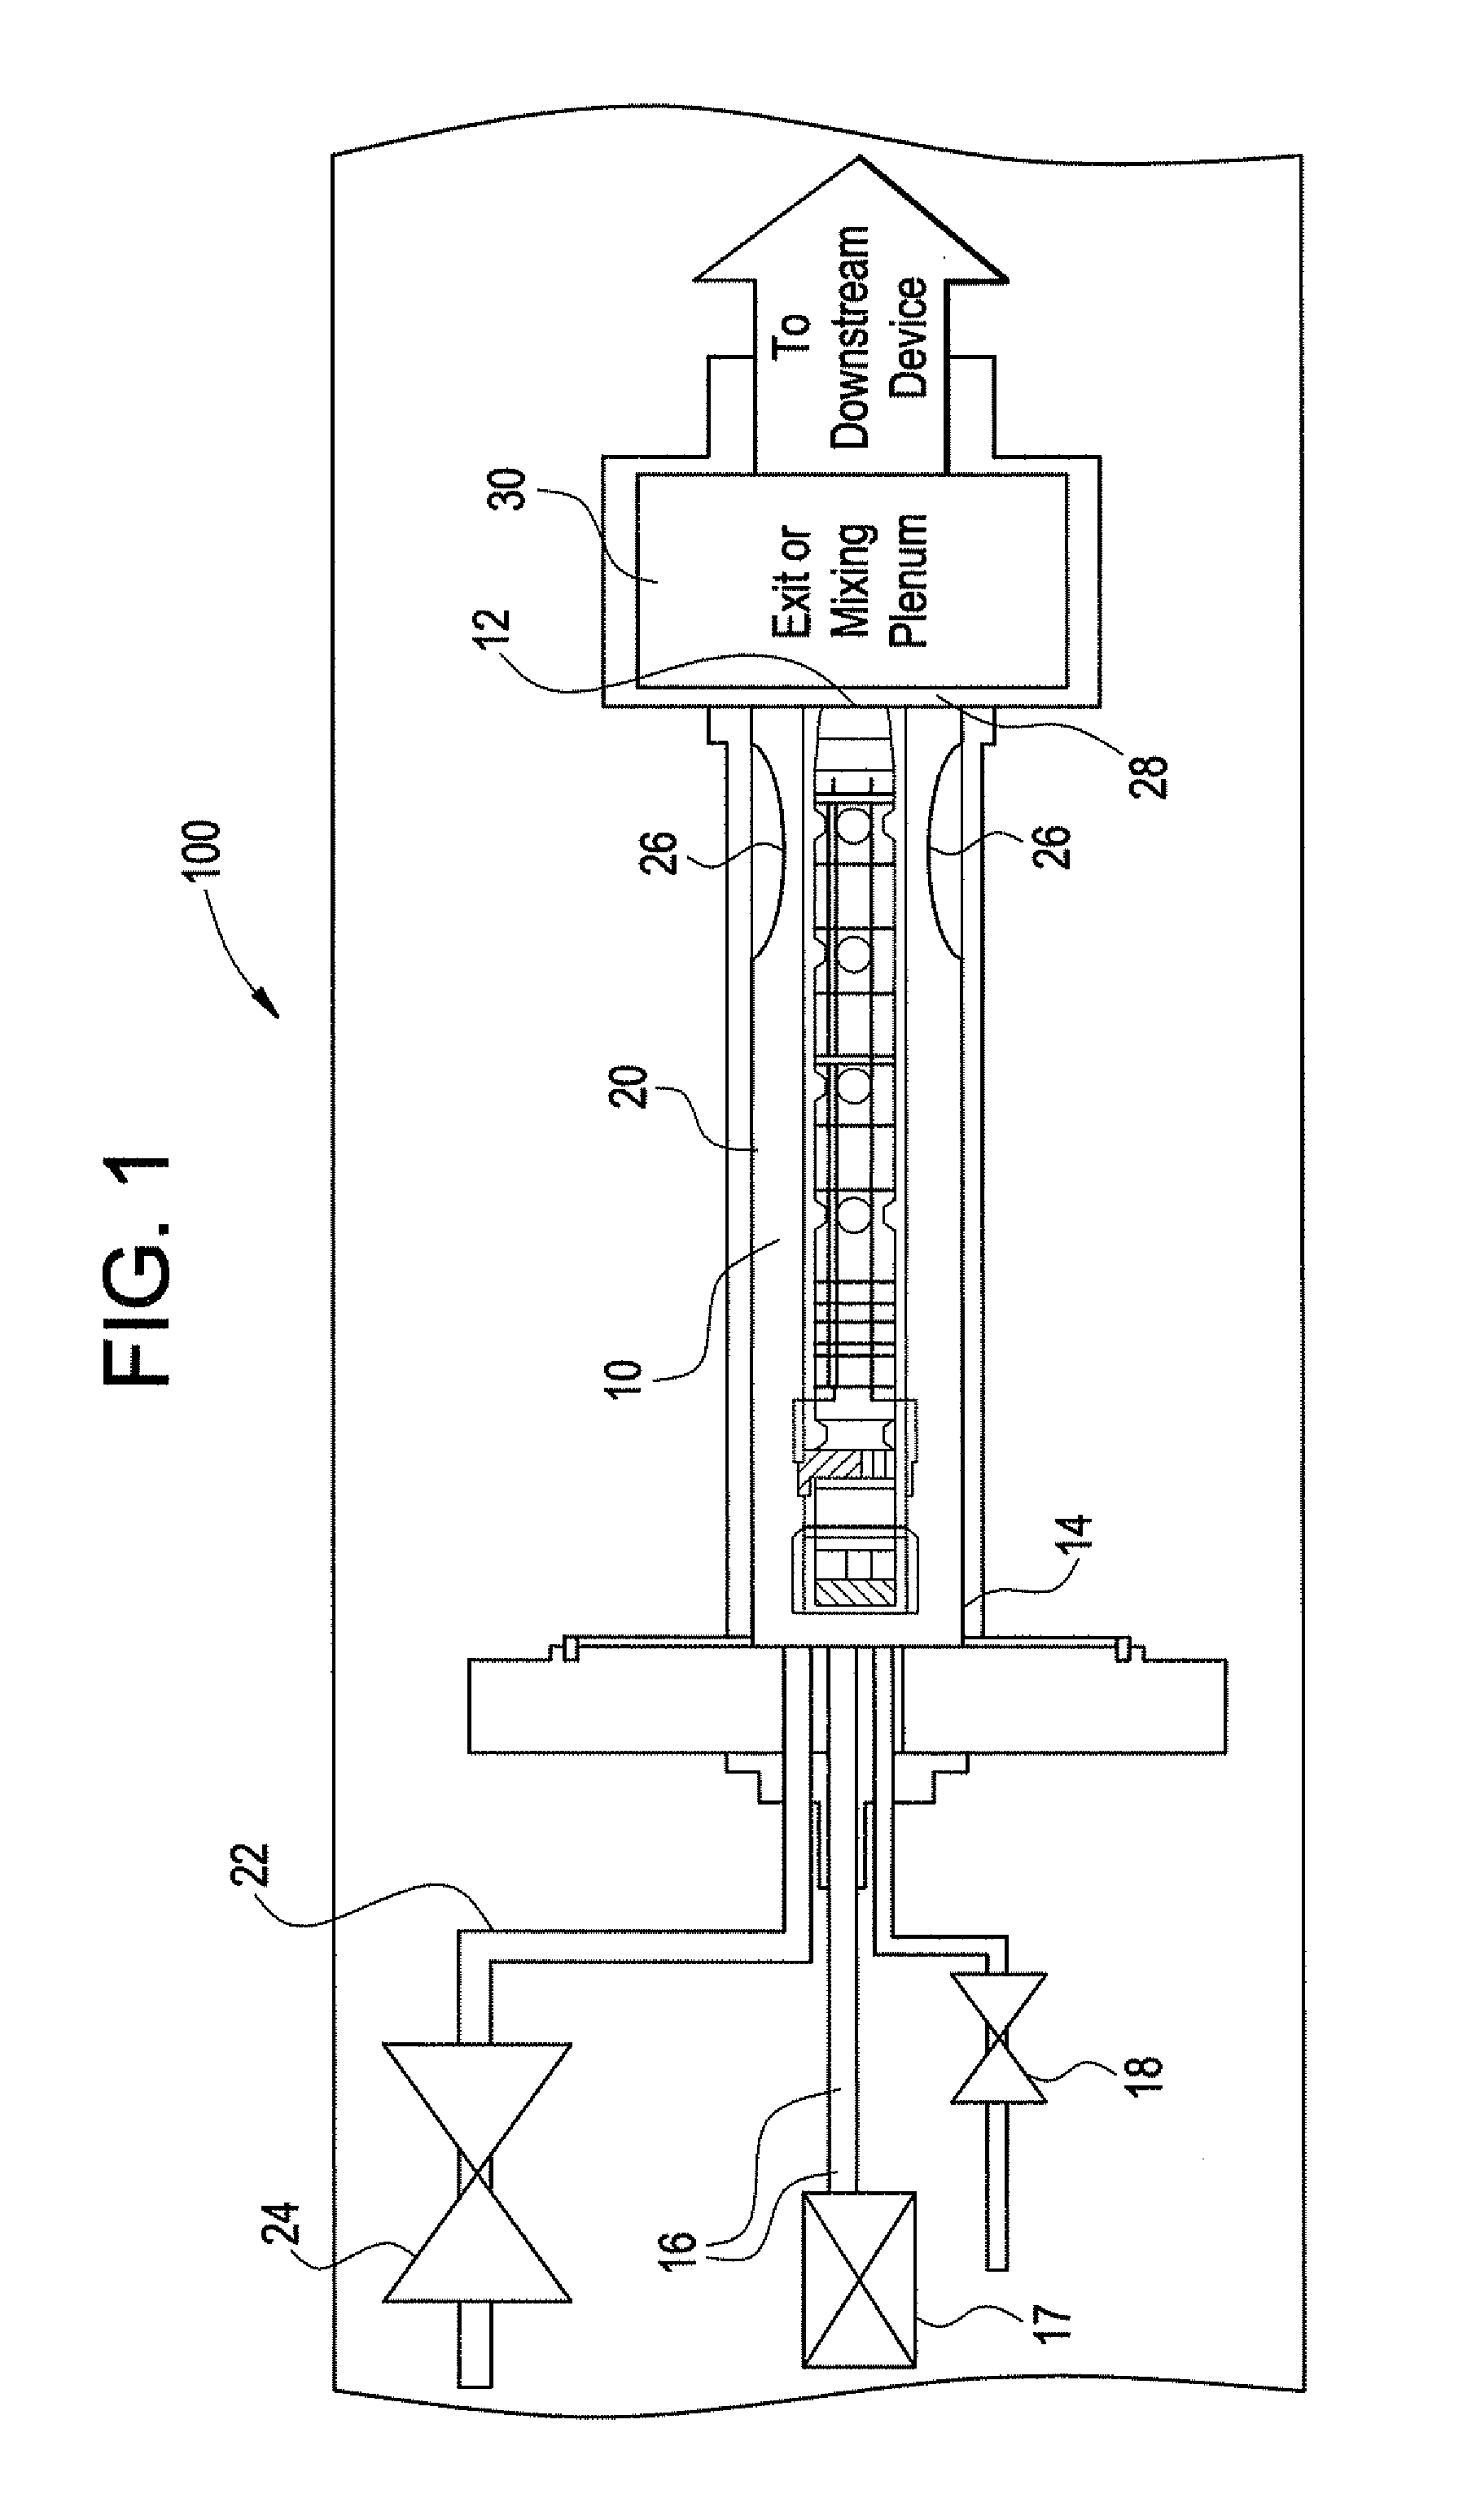 Pulse detonation engine bypass and cooling flow with downstream mixing volume